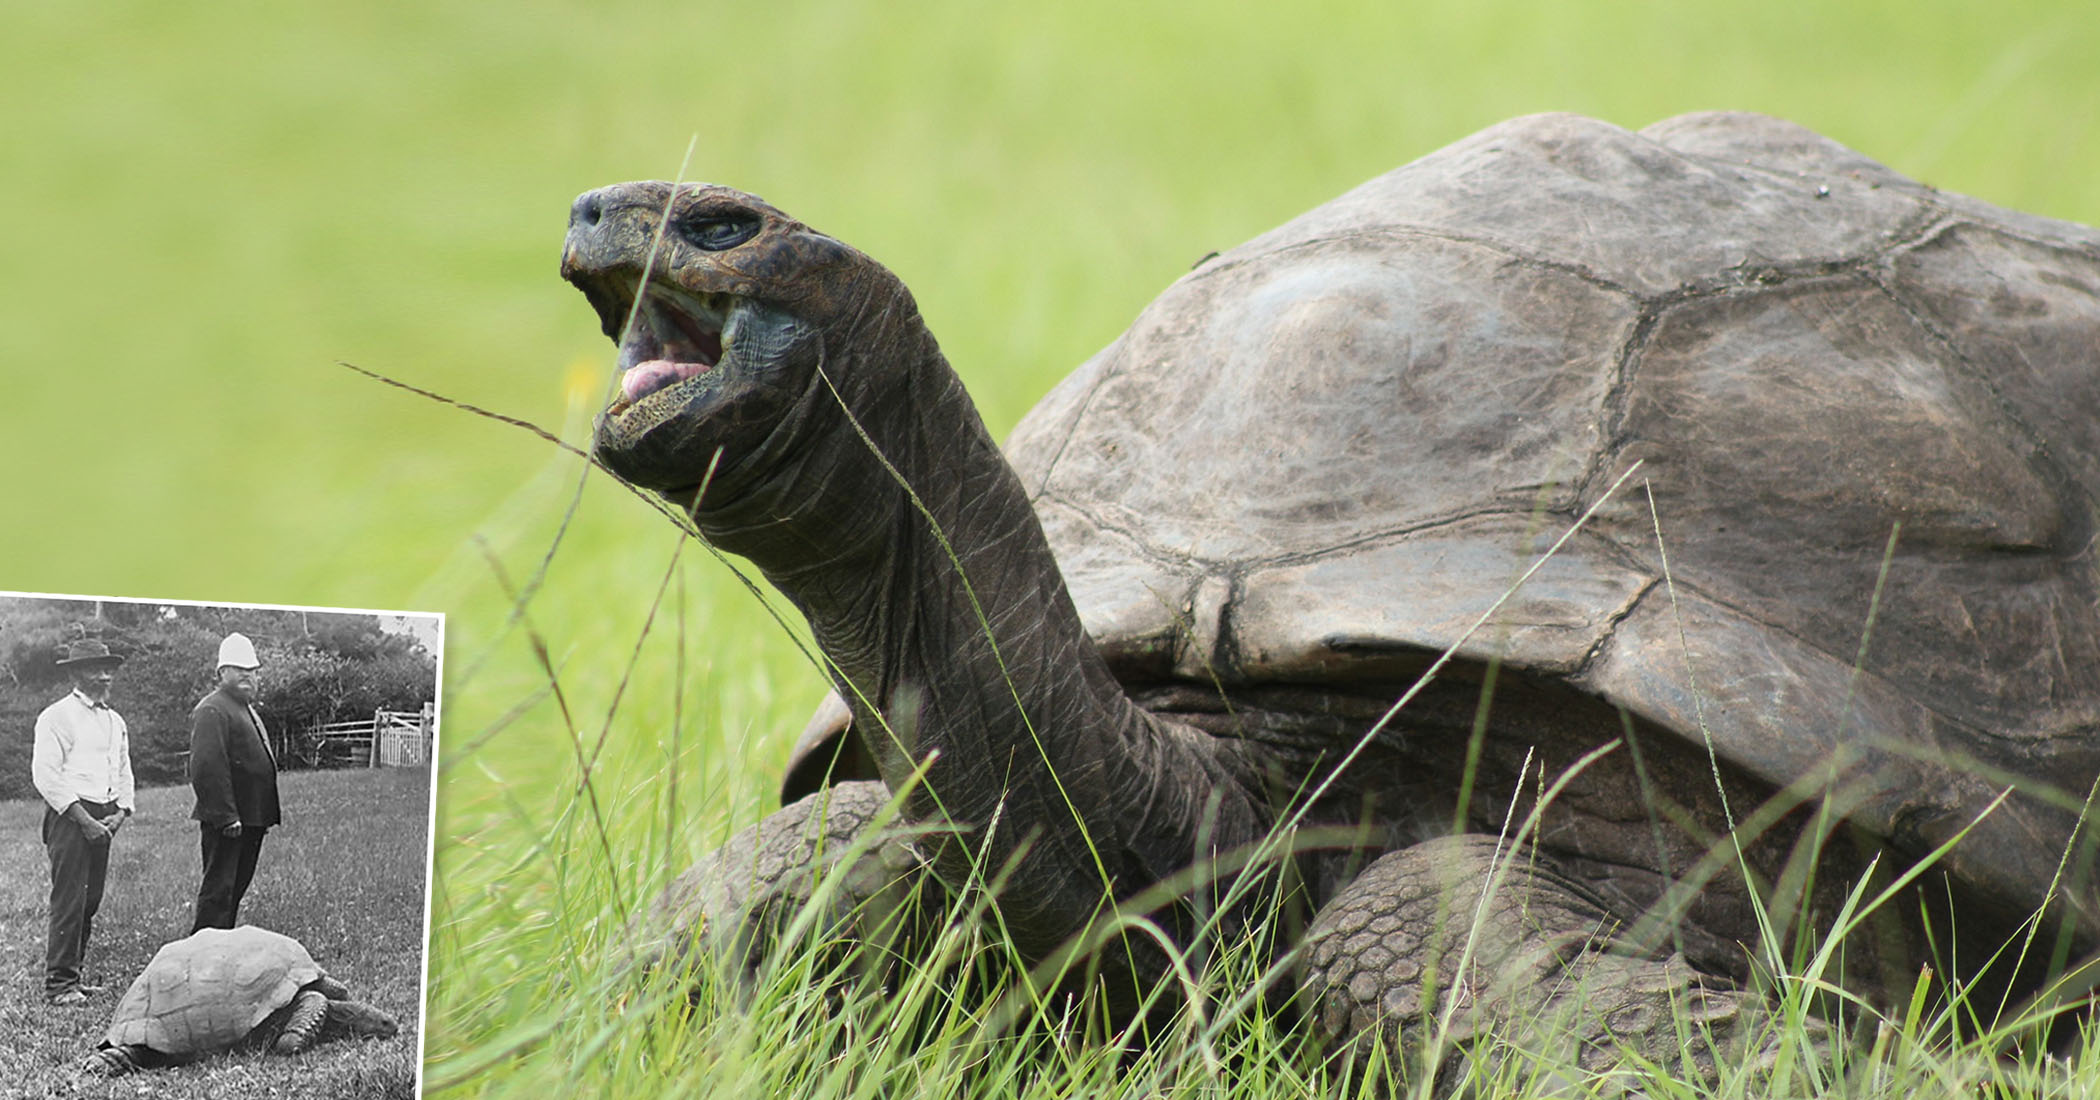 Meet the World’s Oldest Living Land Animal, Jonathan the Tortoise Who Is 190 Years Old